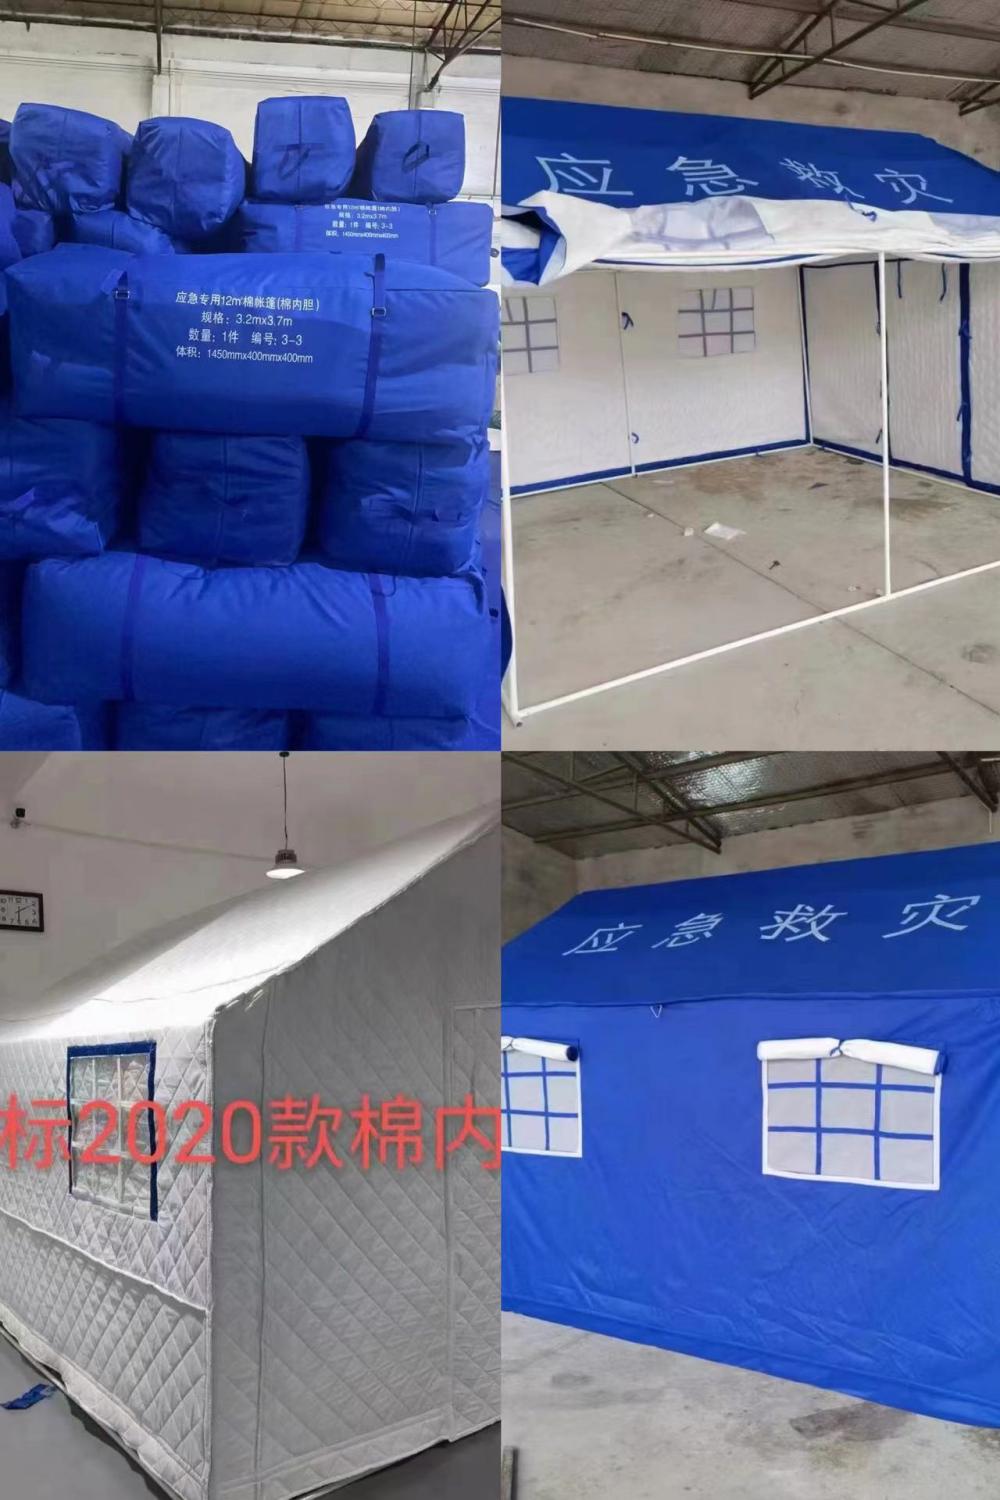 Disaster relief medical emergency tent